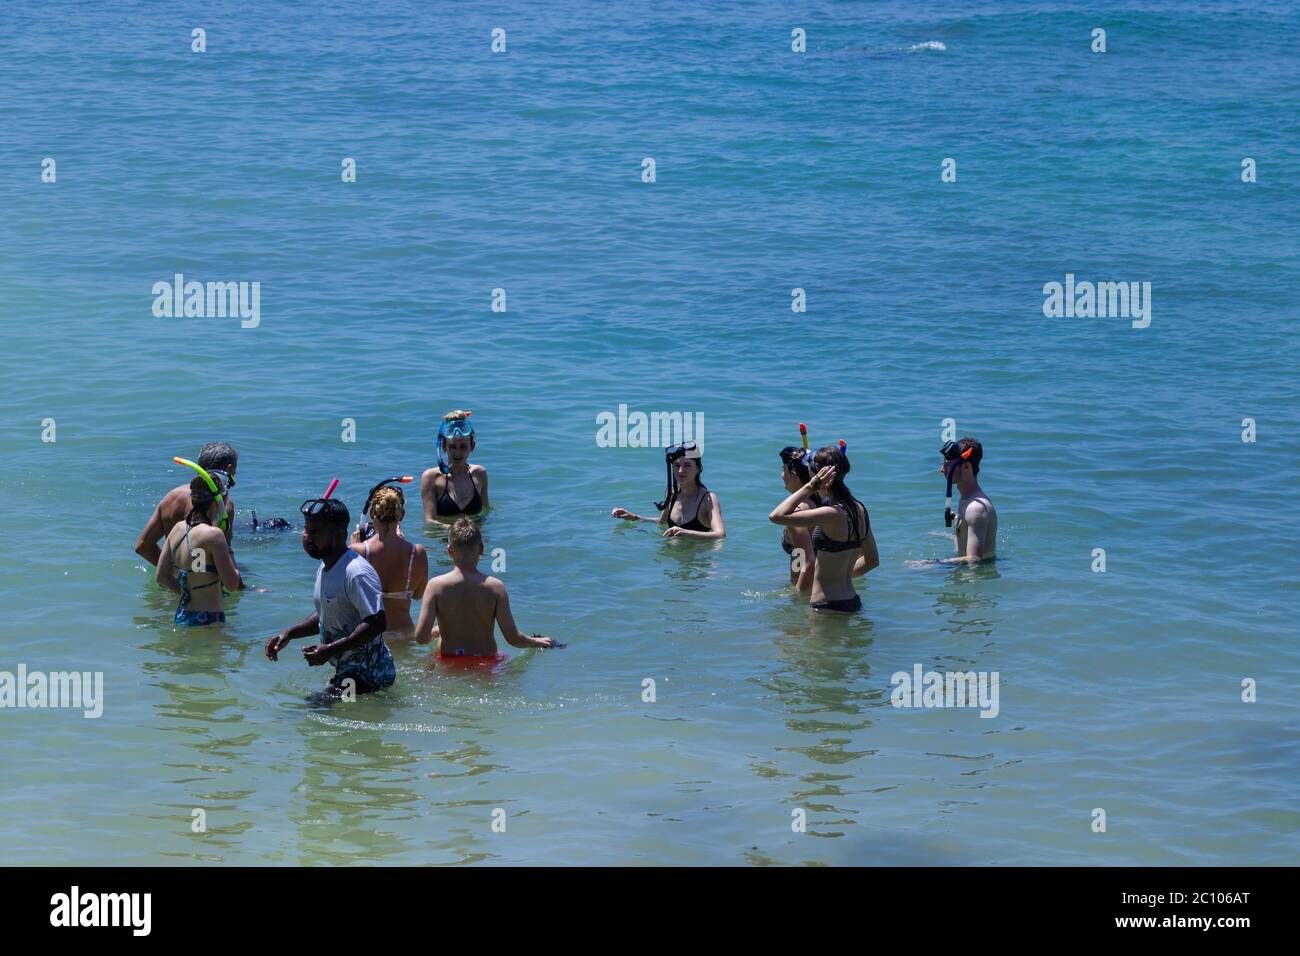 Snorkeling training activity in the sea for the tourist Stock Photo